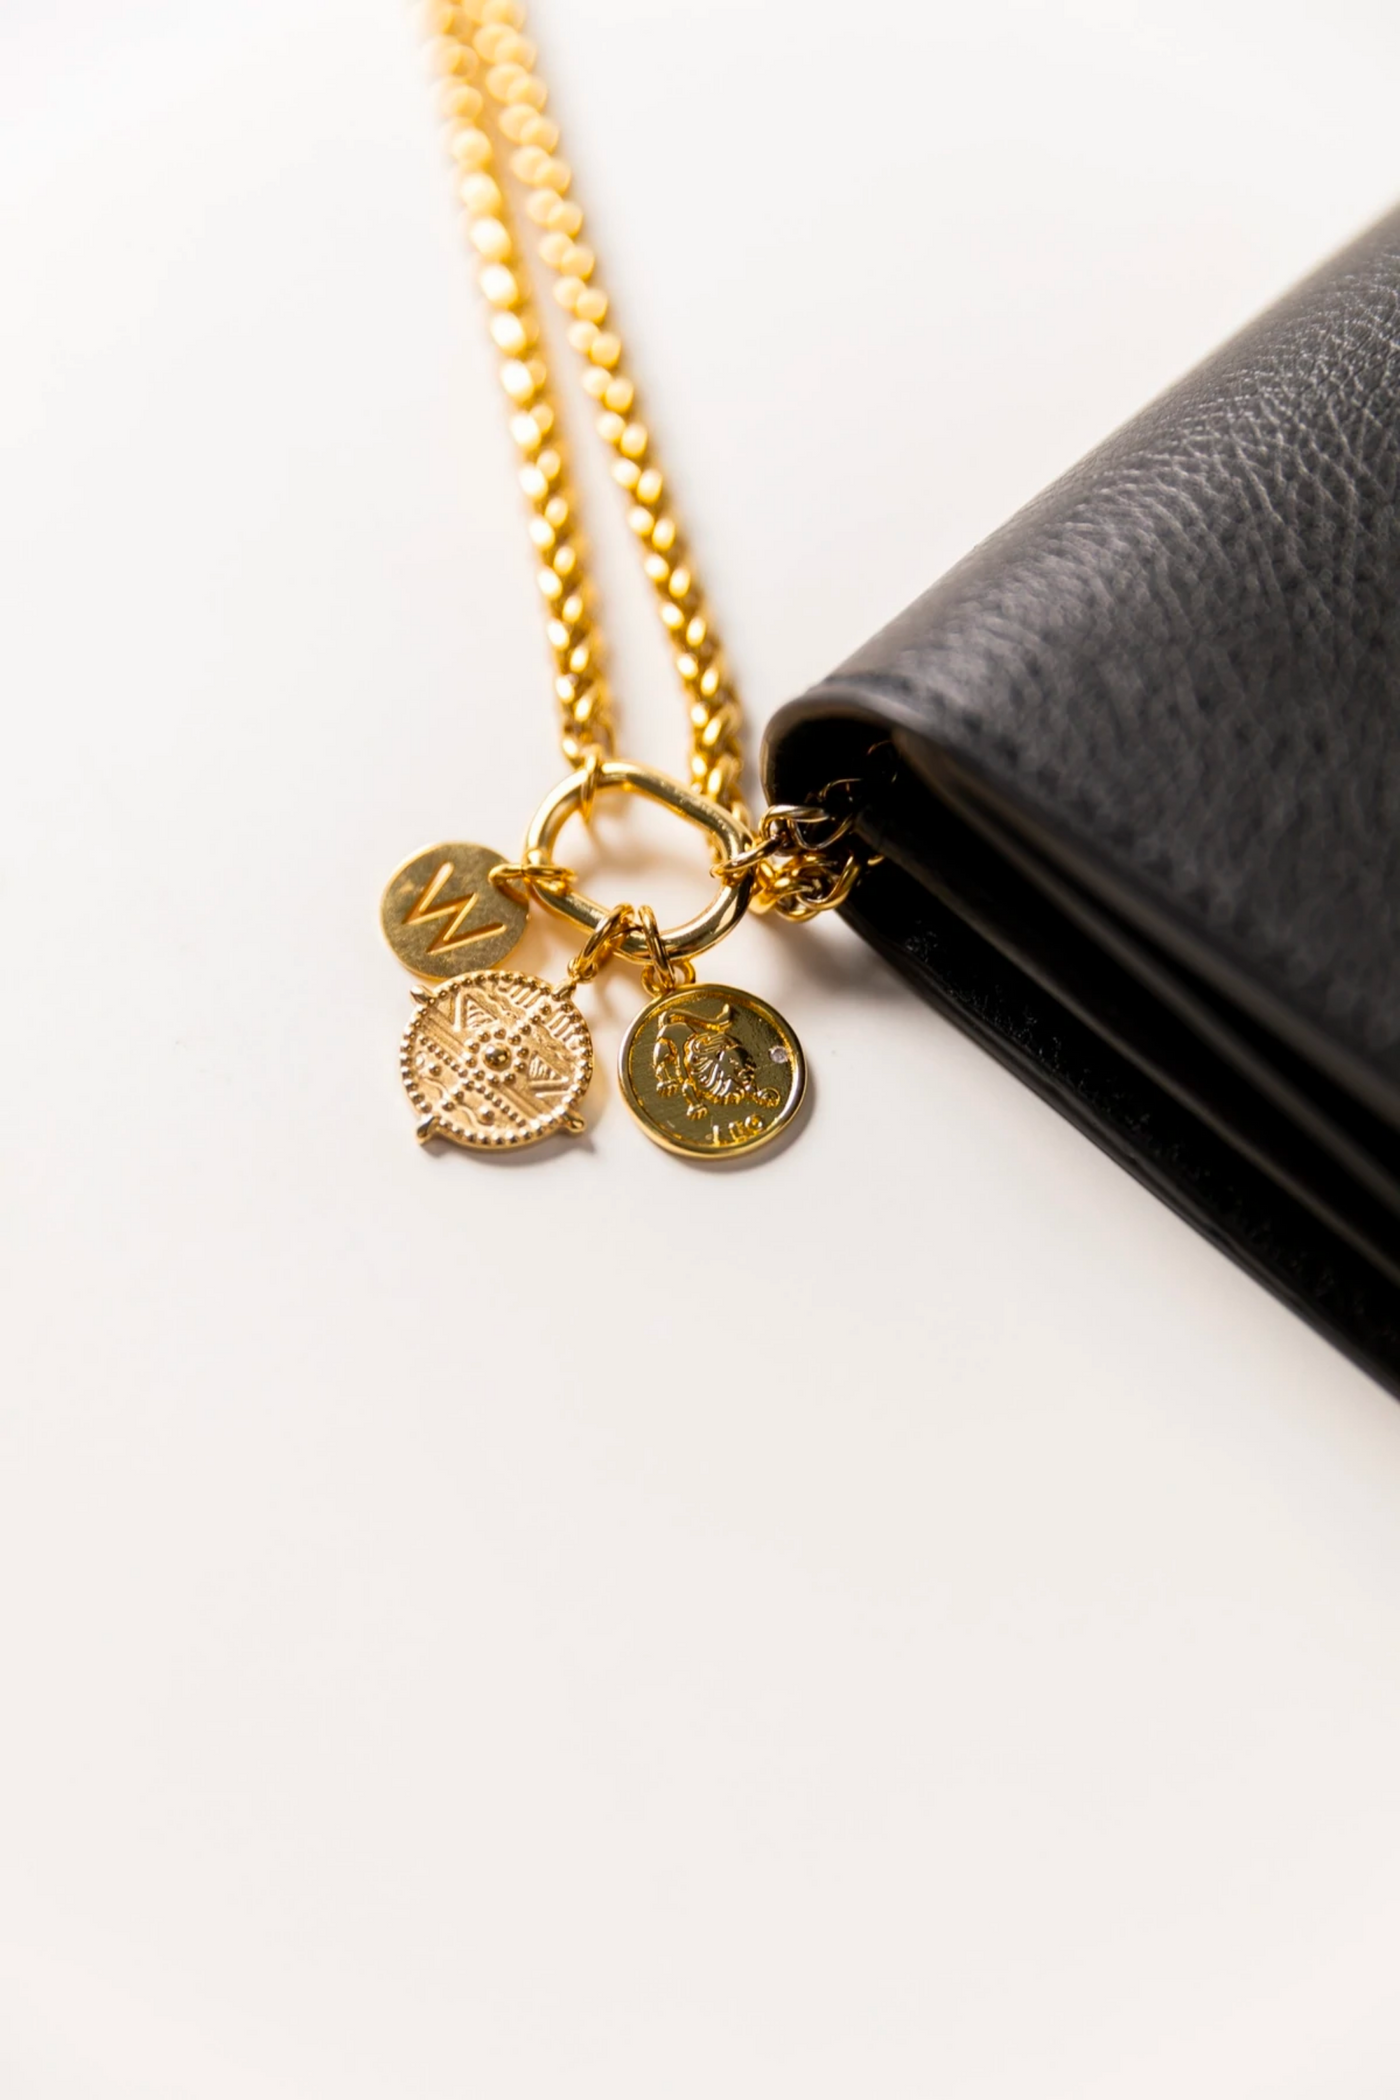 The Elsewhere Co. Gold Protector Amulet Bag Charm, available on ZERRIN